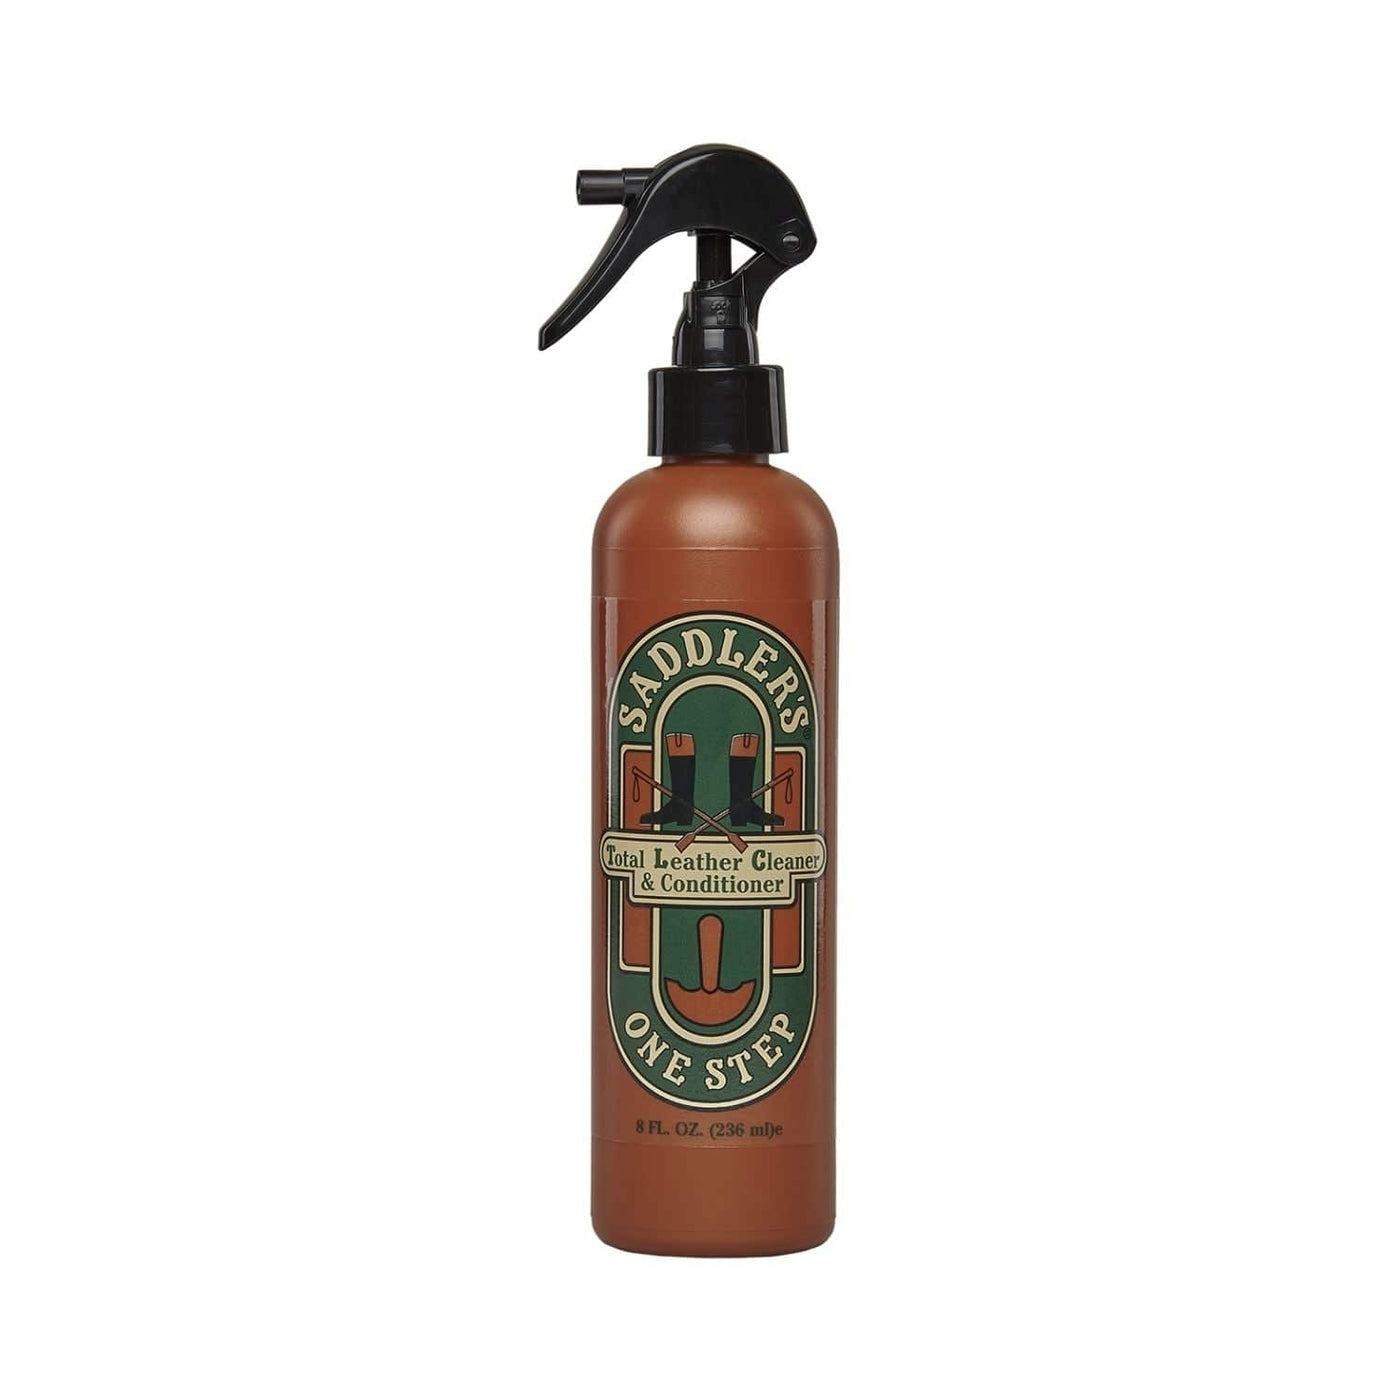 Saddler’s TLC One Step Leather Cleaner and Conditioner -  leather cleaner -  leather conditioner -  leather care product -  lady conceal -  one step leather cleaner